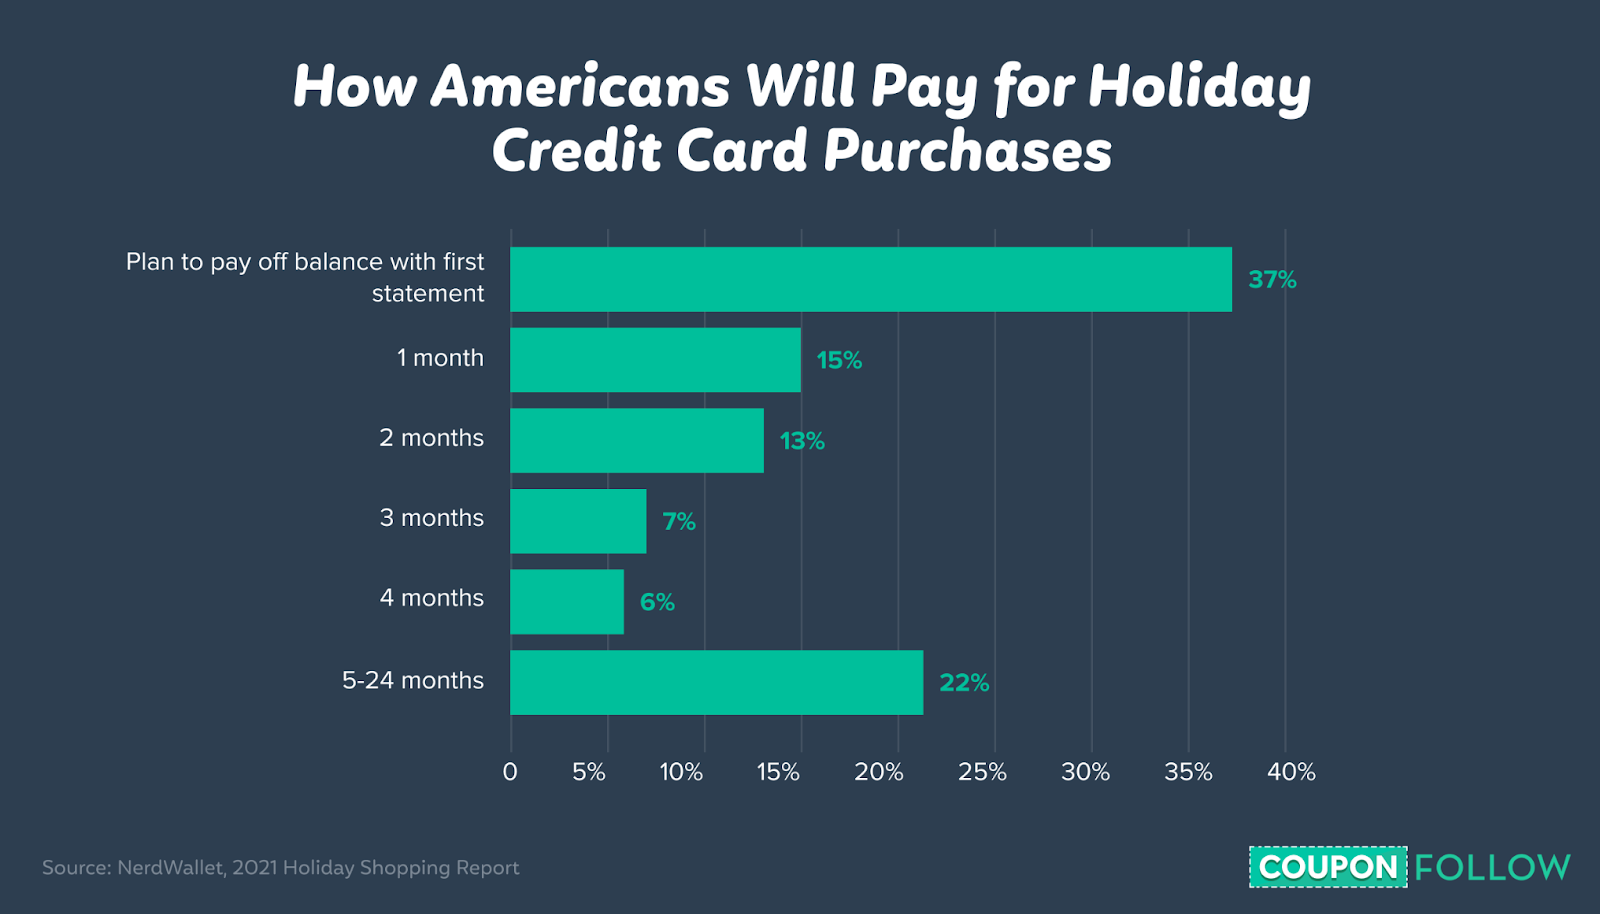 Plans for holiday shopping credit balance